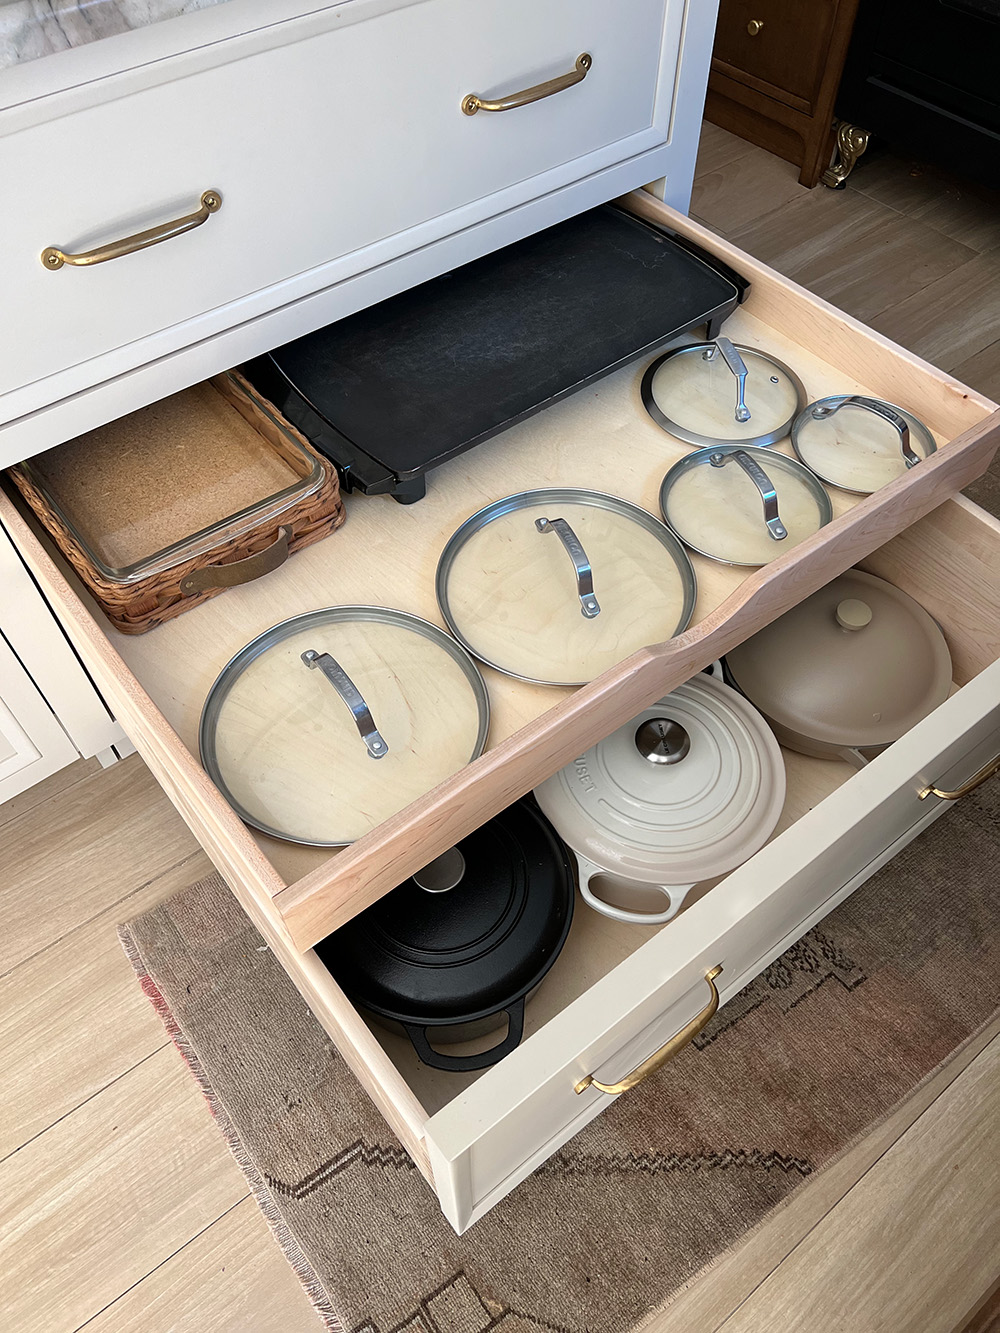 How to Store Lids for Pots and Pans